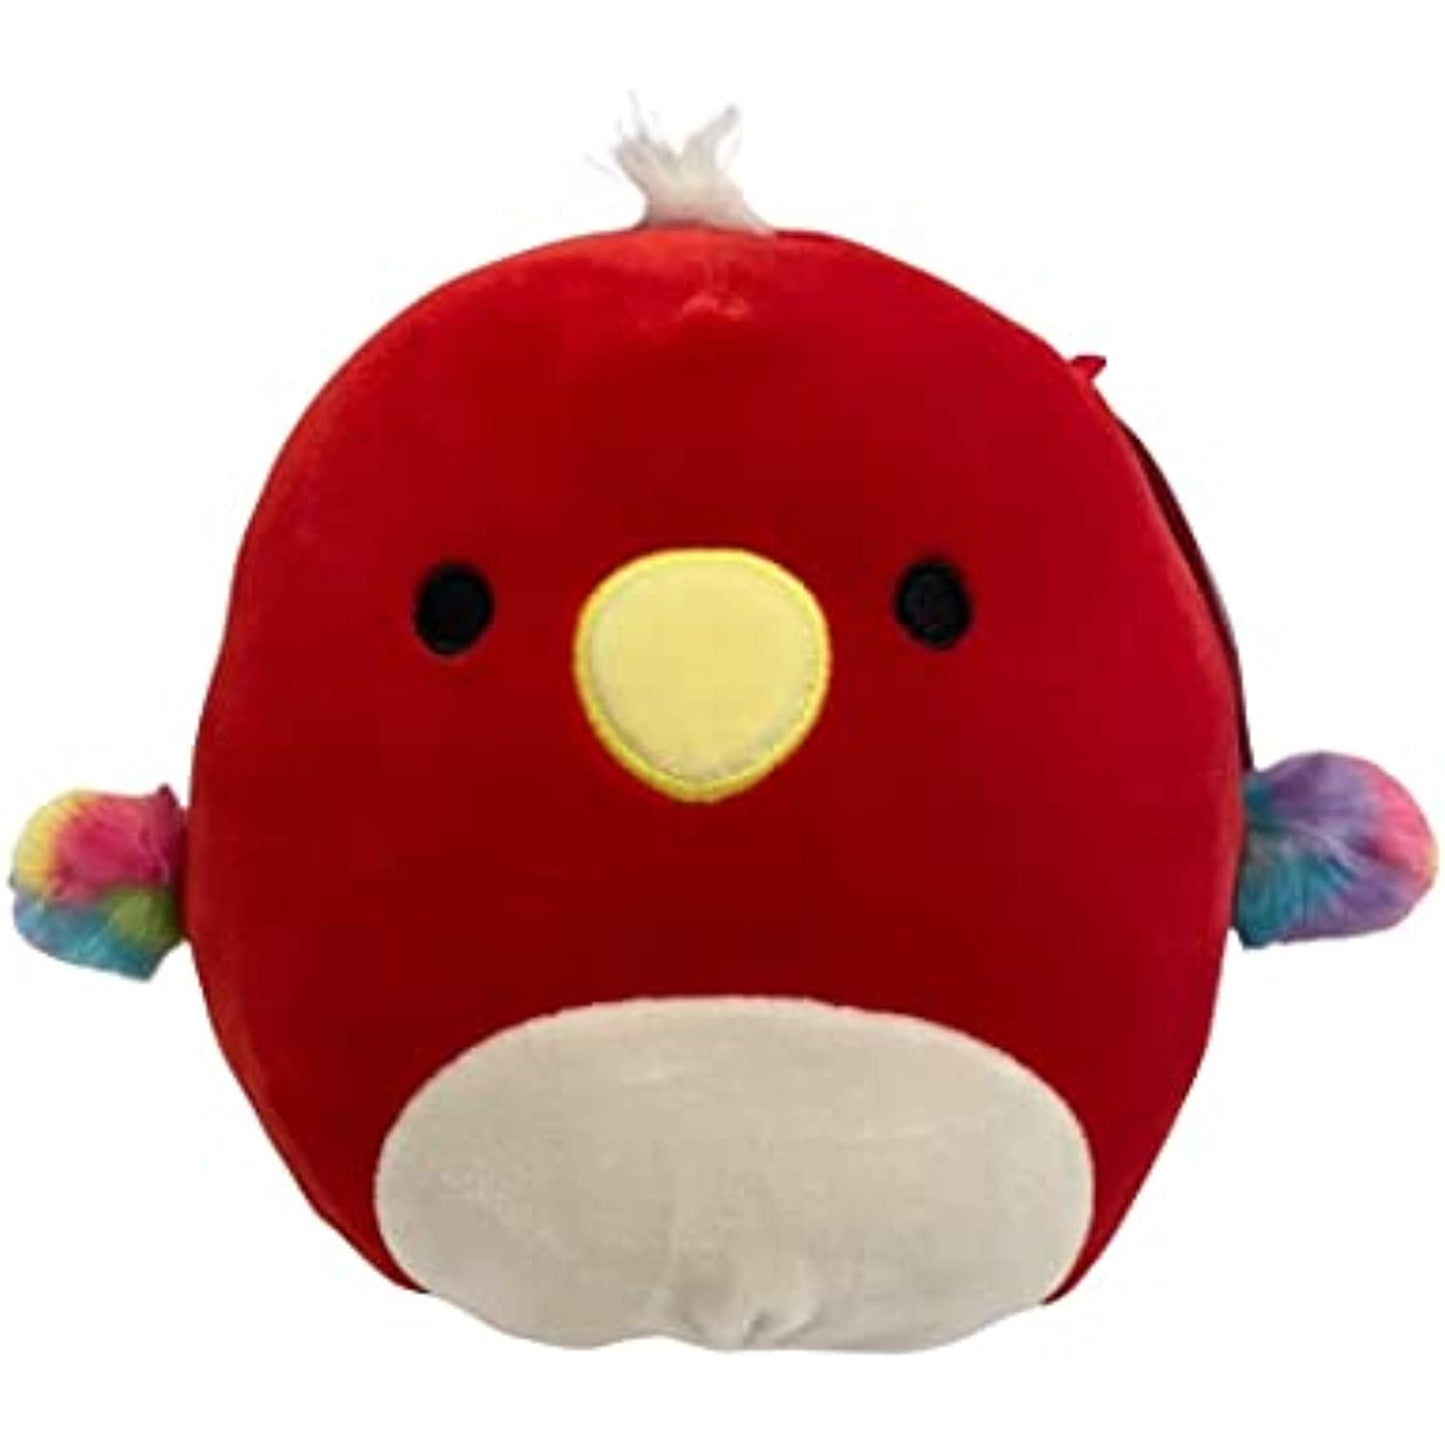 Squishmallows Official Kellytoy 7 Inch Soft Plush Squishy Toy Animals… (Paco Parrot)